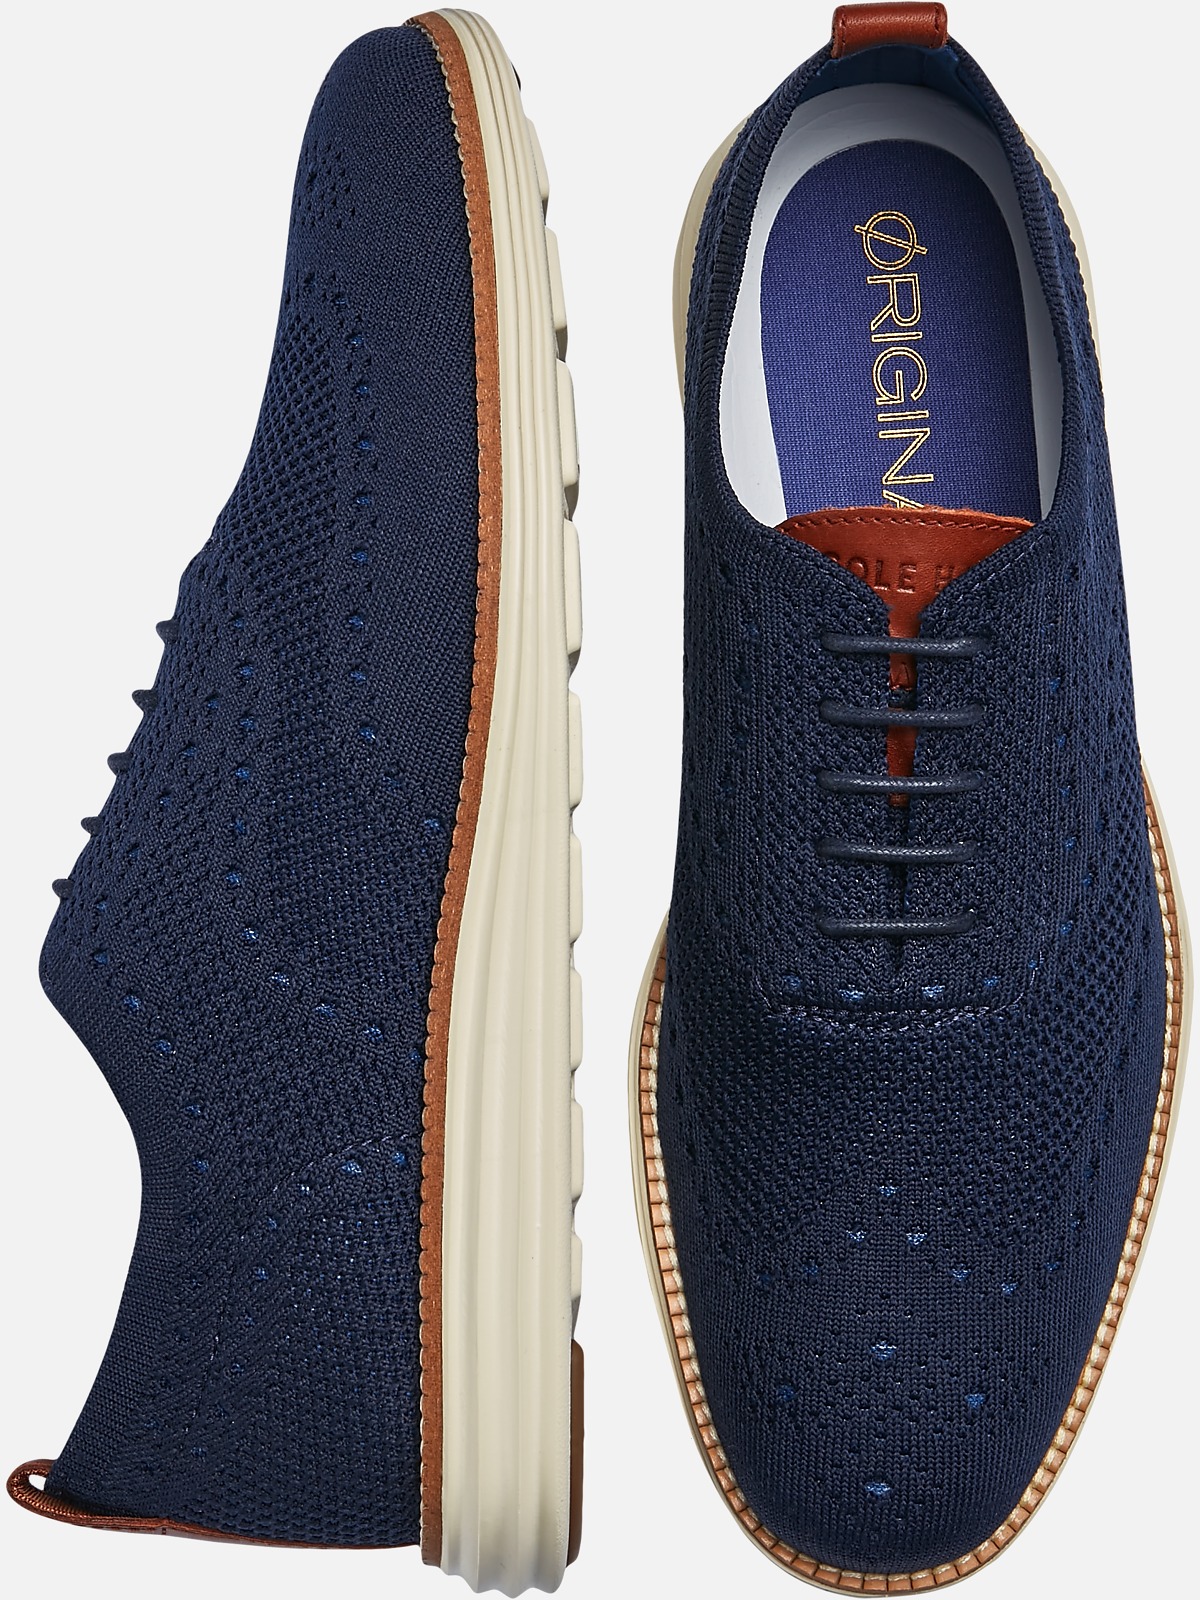 Cole Haan Grand Stitchlite Wingtip Casual Oxfords | All Clearance $39. ...